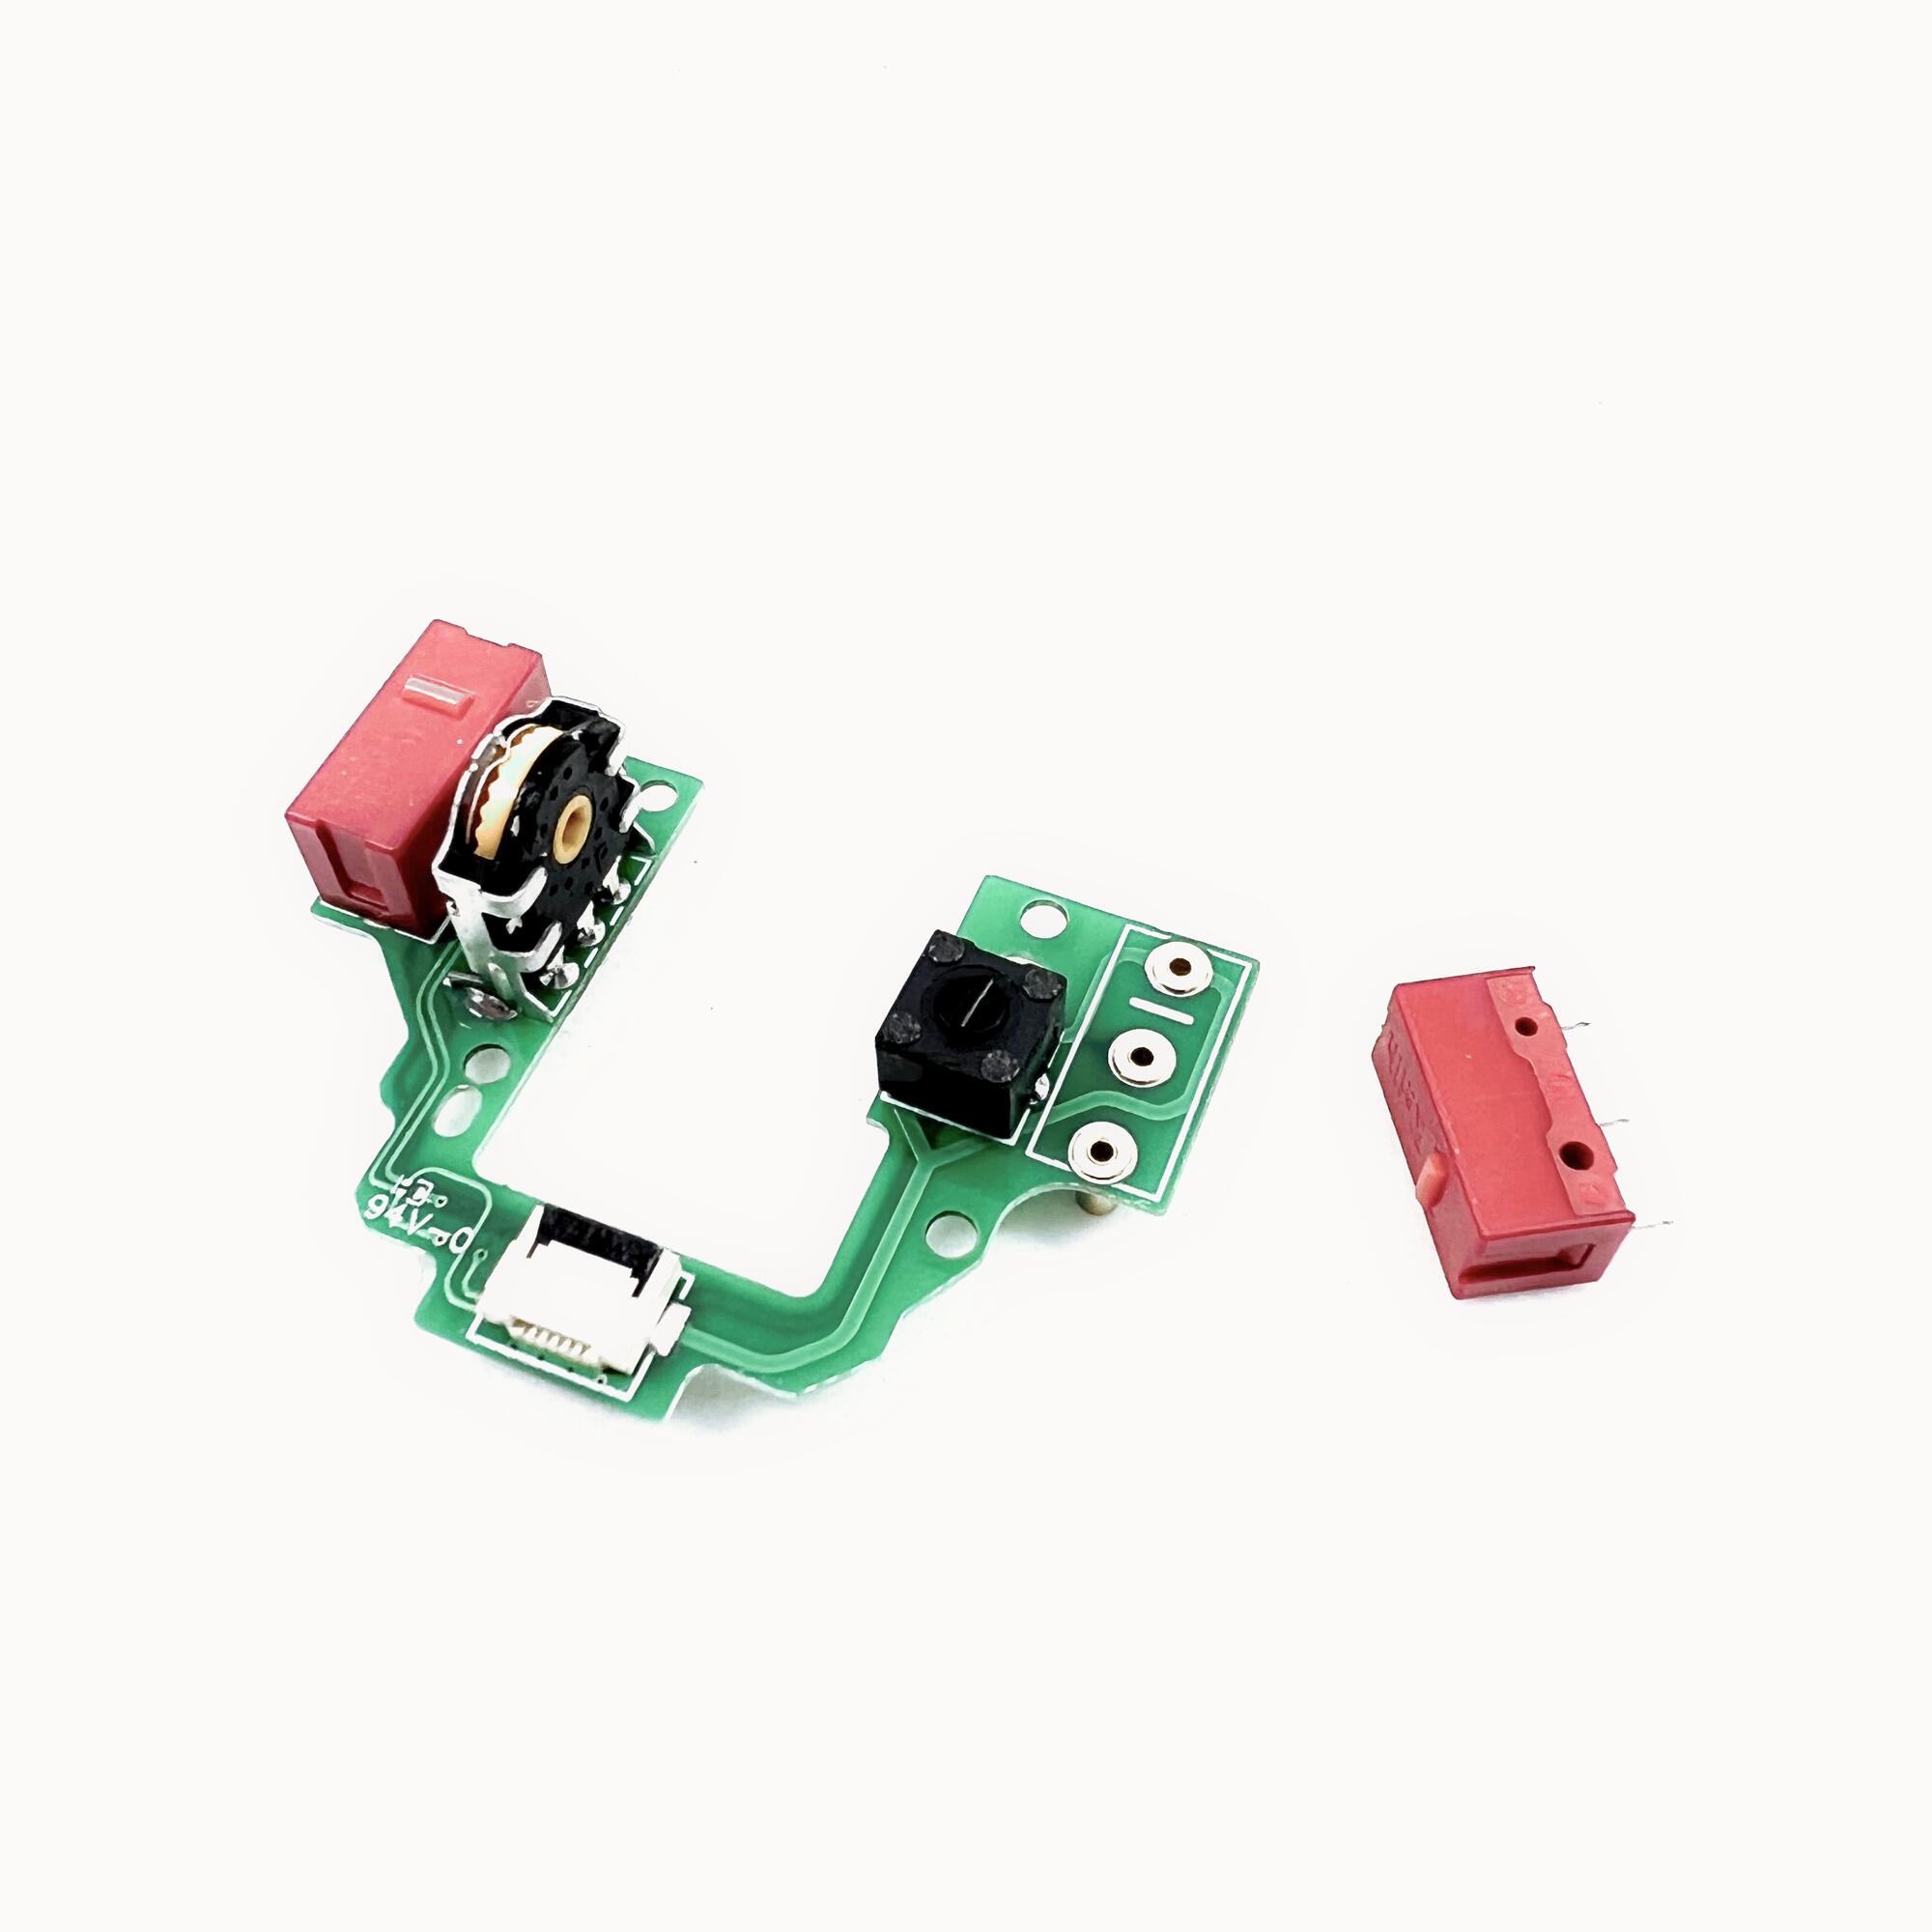 G Pro X Superlight Hot-swappable PCB Board - FacFox Shop